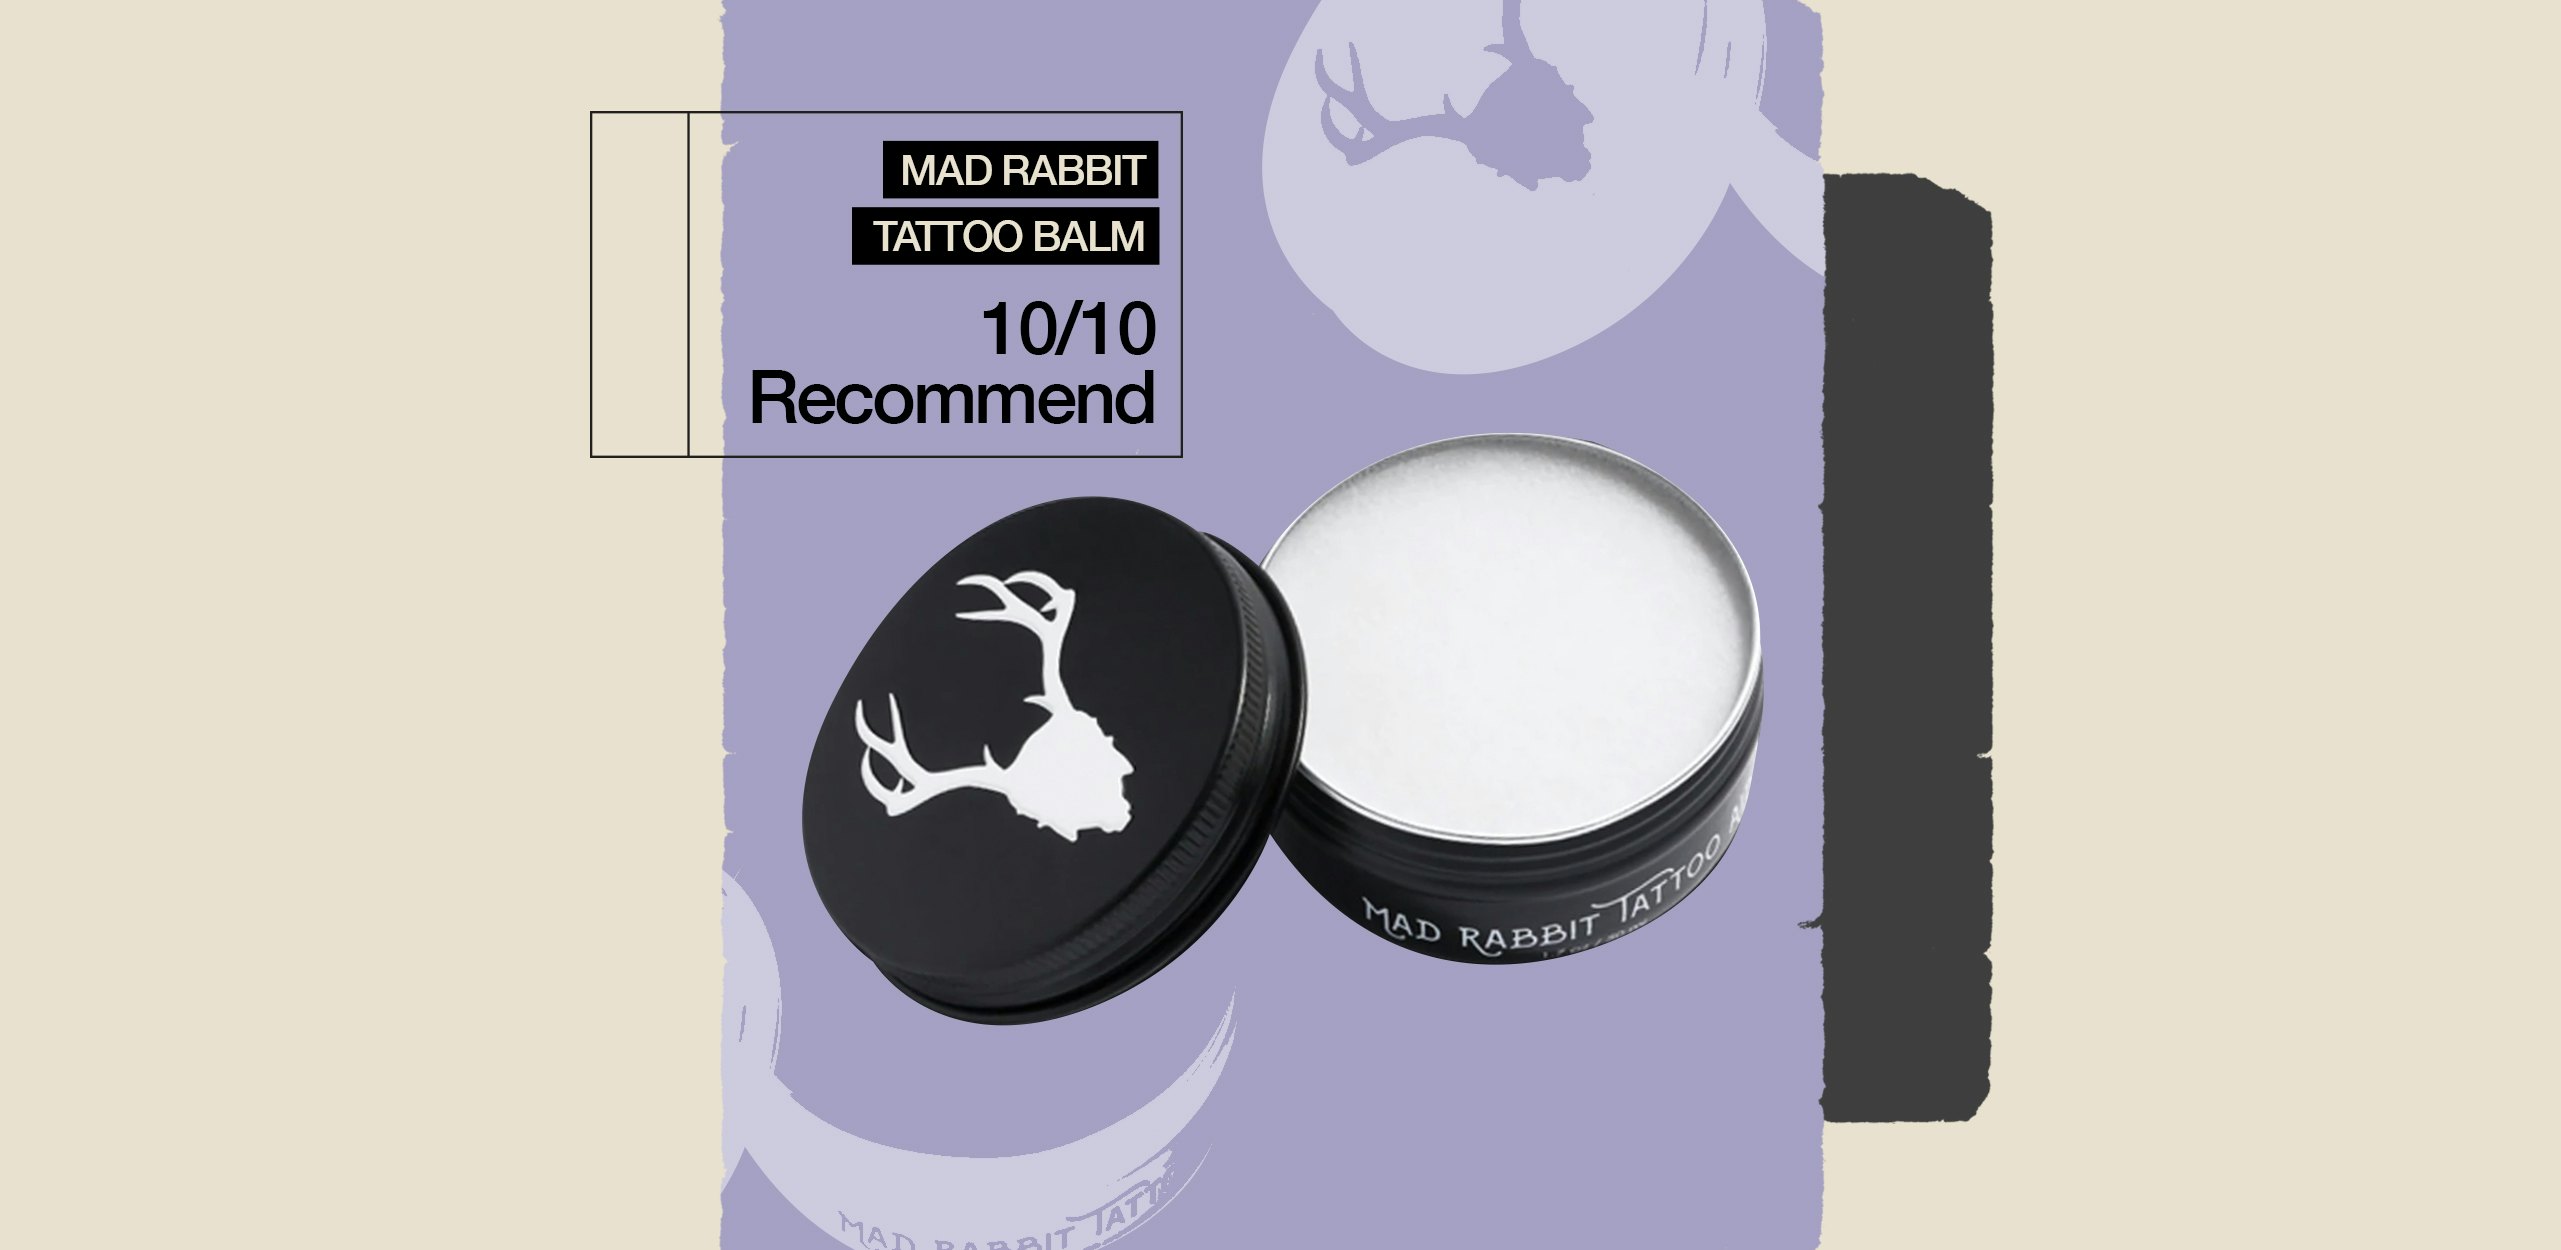 Tattoo Aftercare Products  Tattoo Lotion  More  Mad Rabbit Tattoo